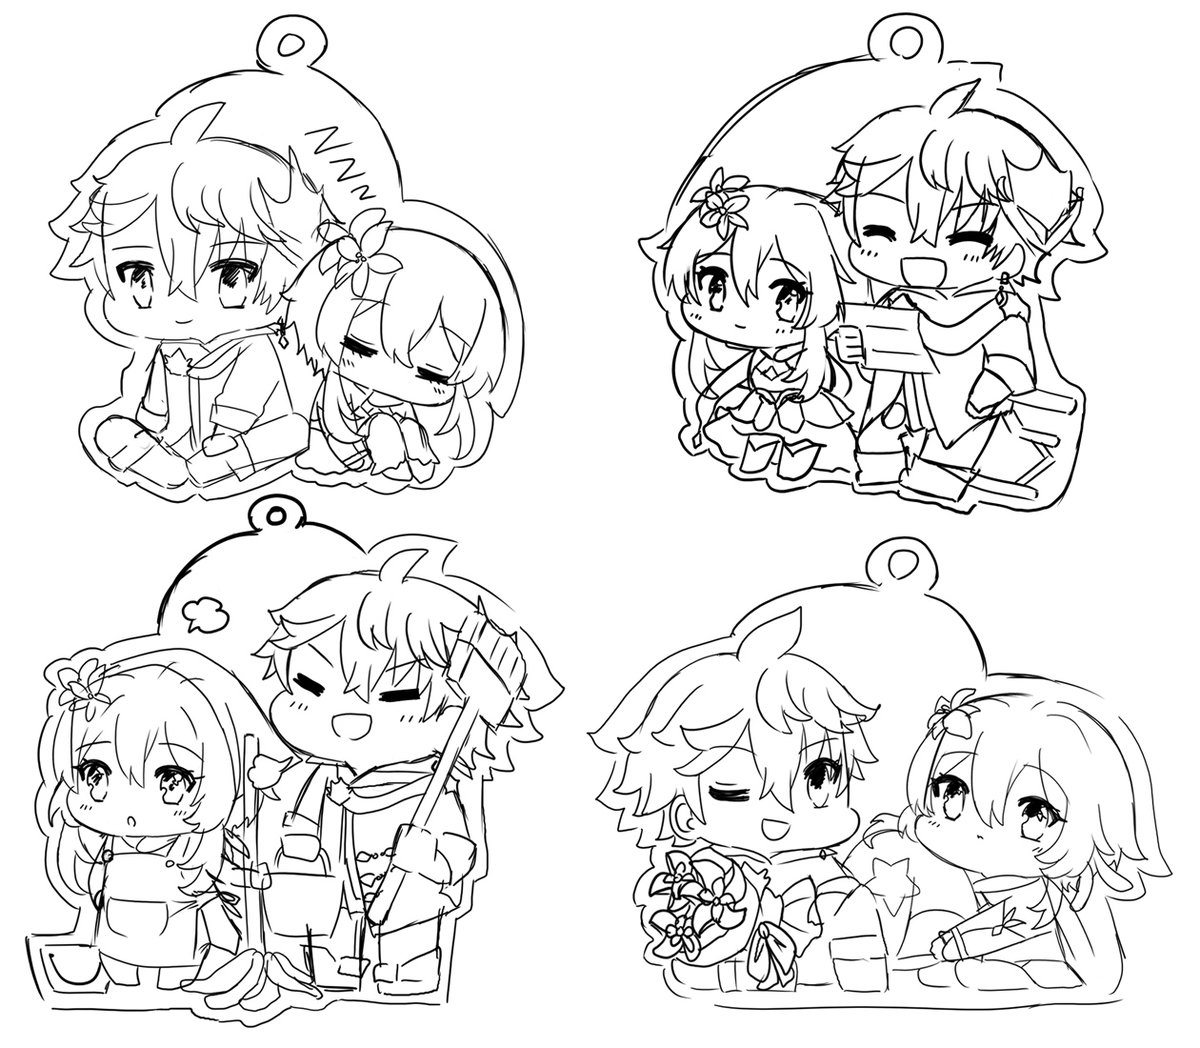 lol i hope i can finish this asap :') since last month i want to try make some keychains of this two cutie :') dunno if it's possible or not 🤔🤔🤔 